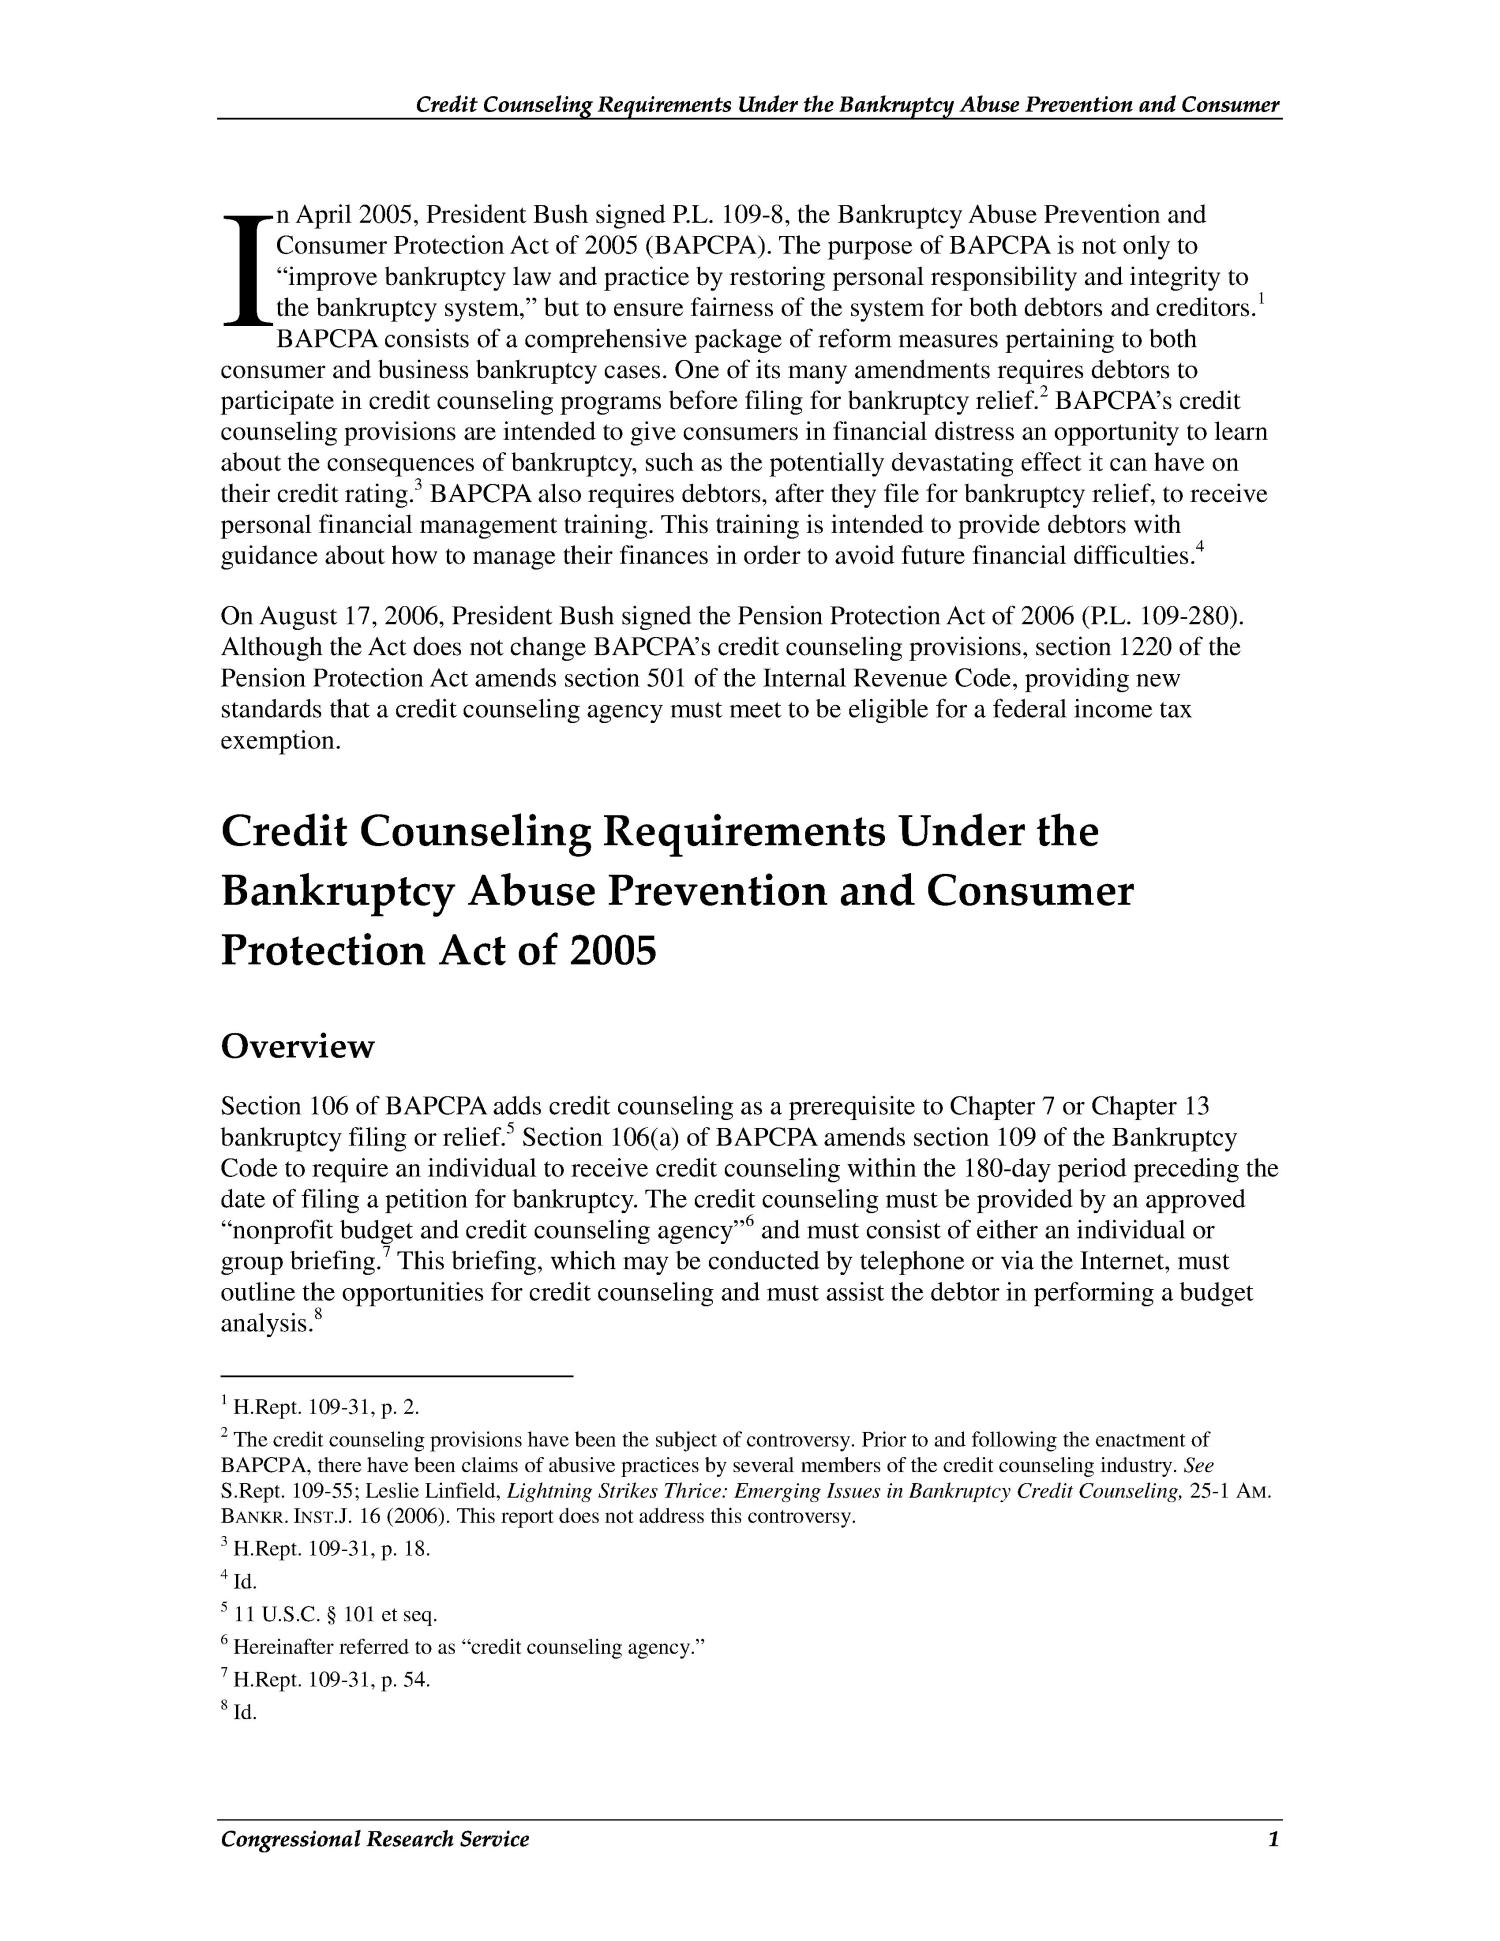 Credit Counseling Requirements Under the Bankruptcy Abuse Prevention and Consumer Protection Act of 2005 and the Pension Protection Act of 2006
                                                
                                                    [Sequence #]: 4 of 13
                                                